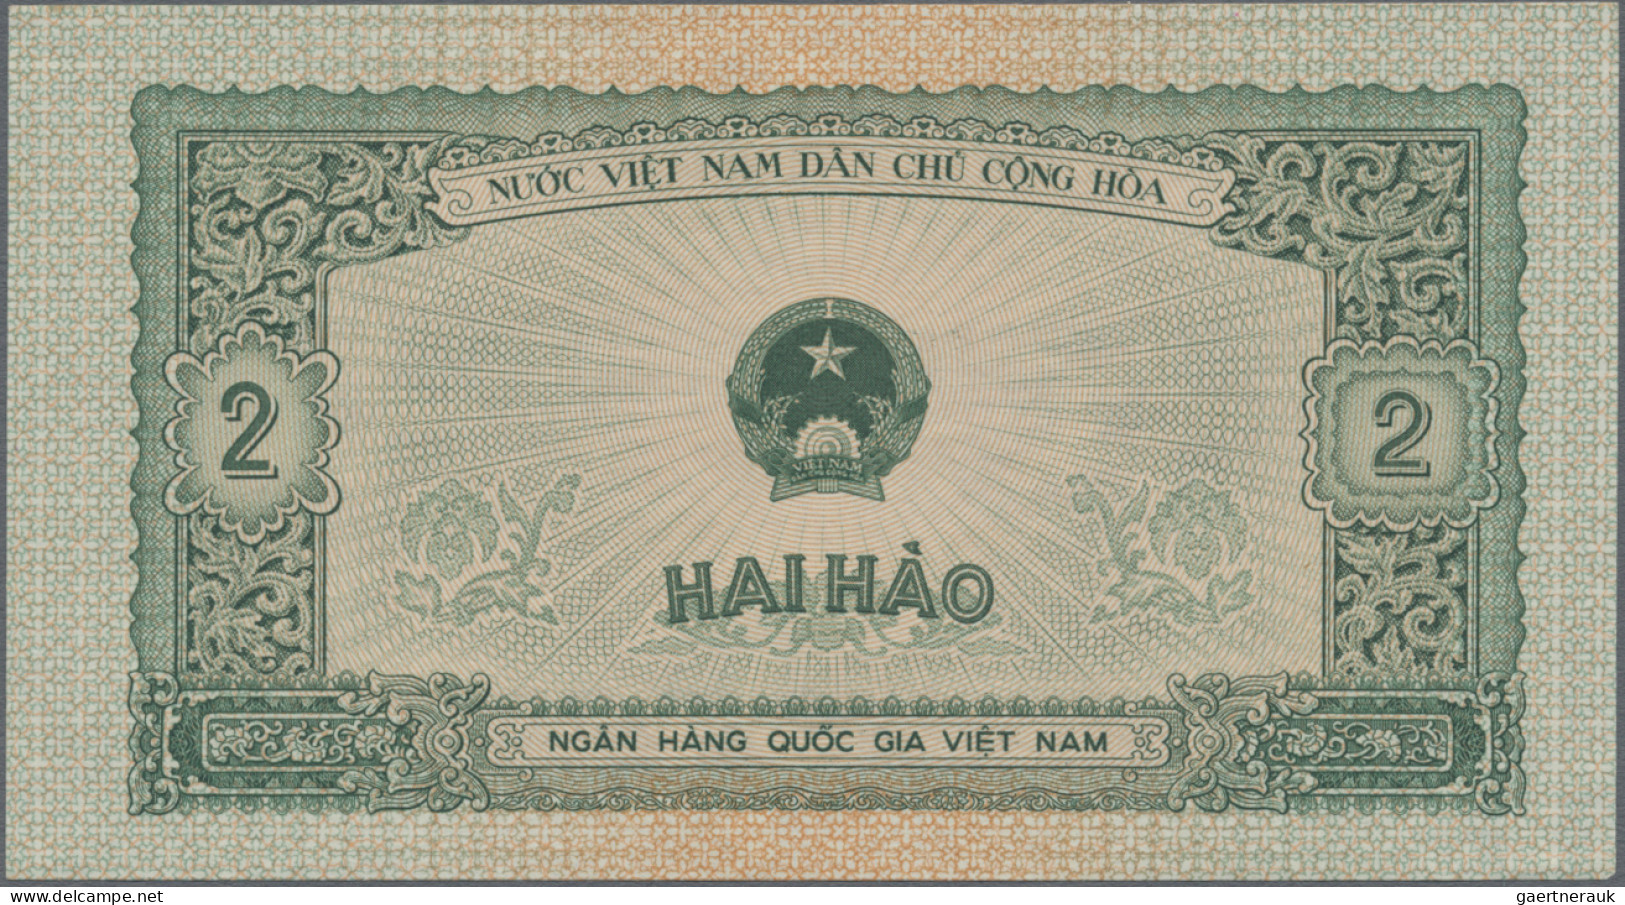 Vietnam: National Bank of Vietnam, lot with 5 banknotes, series 1958 and 1975, w